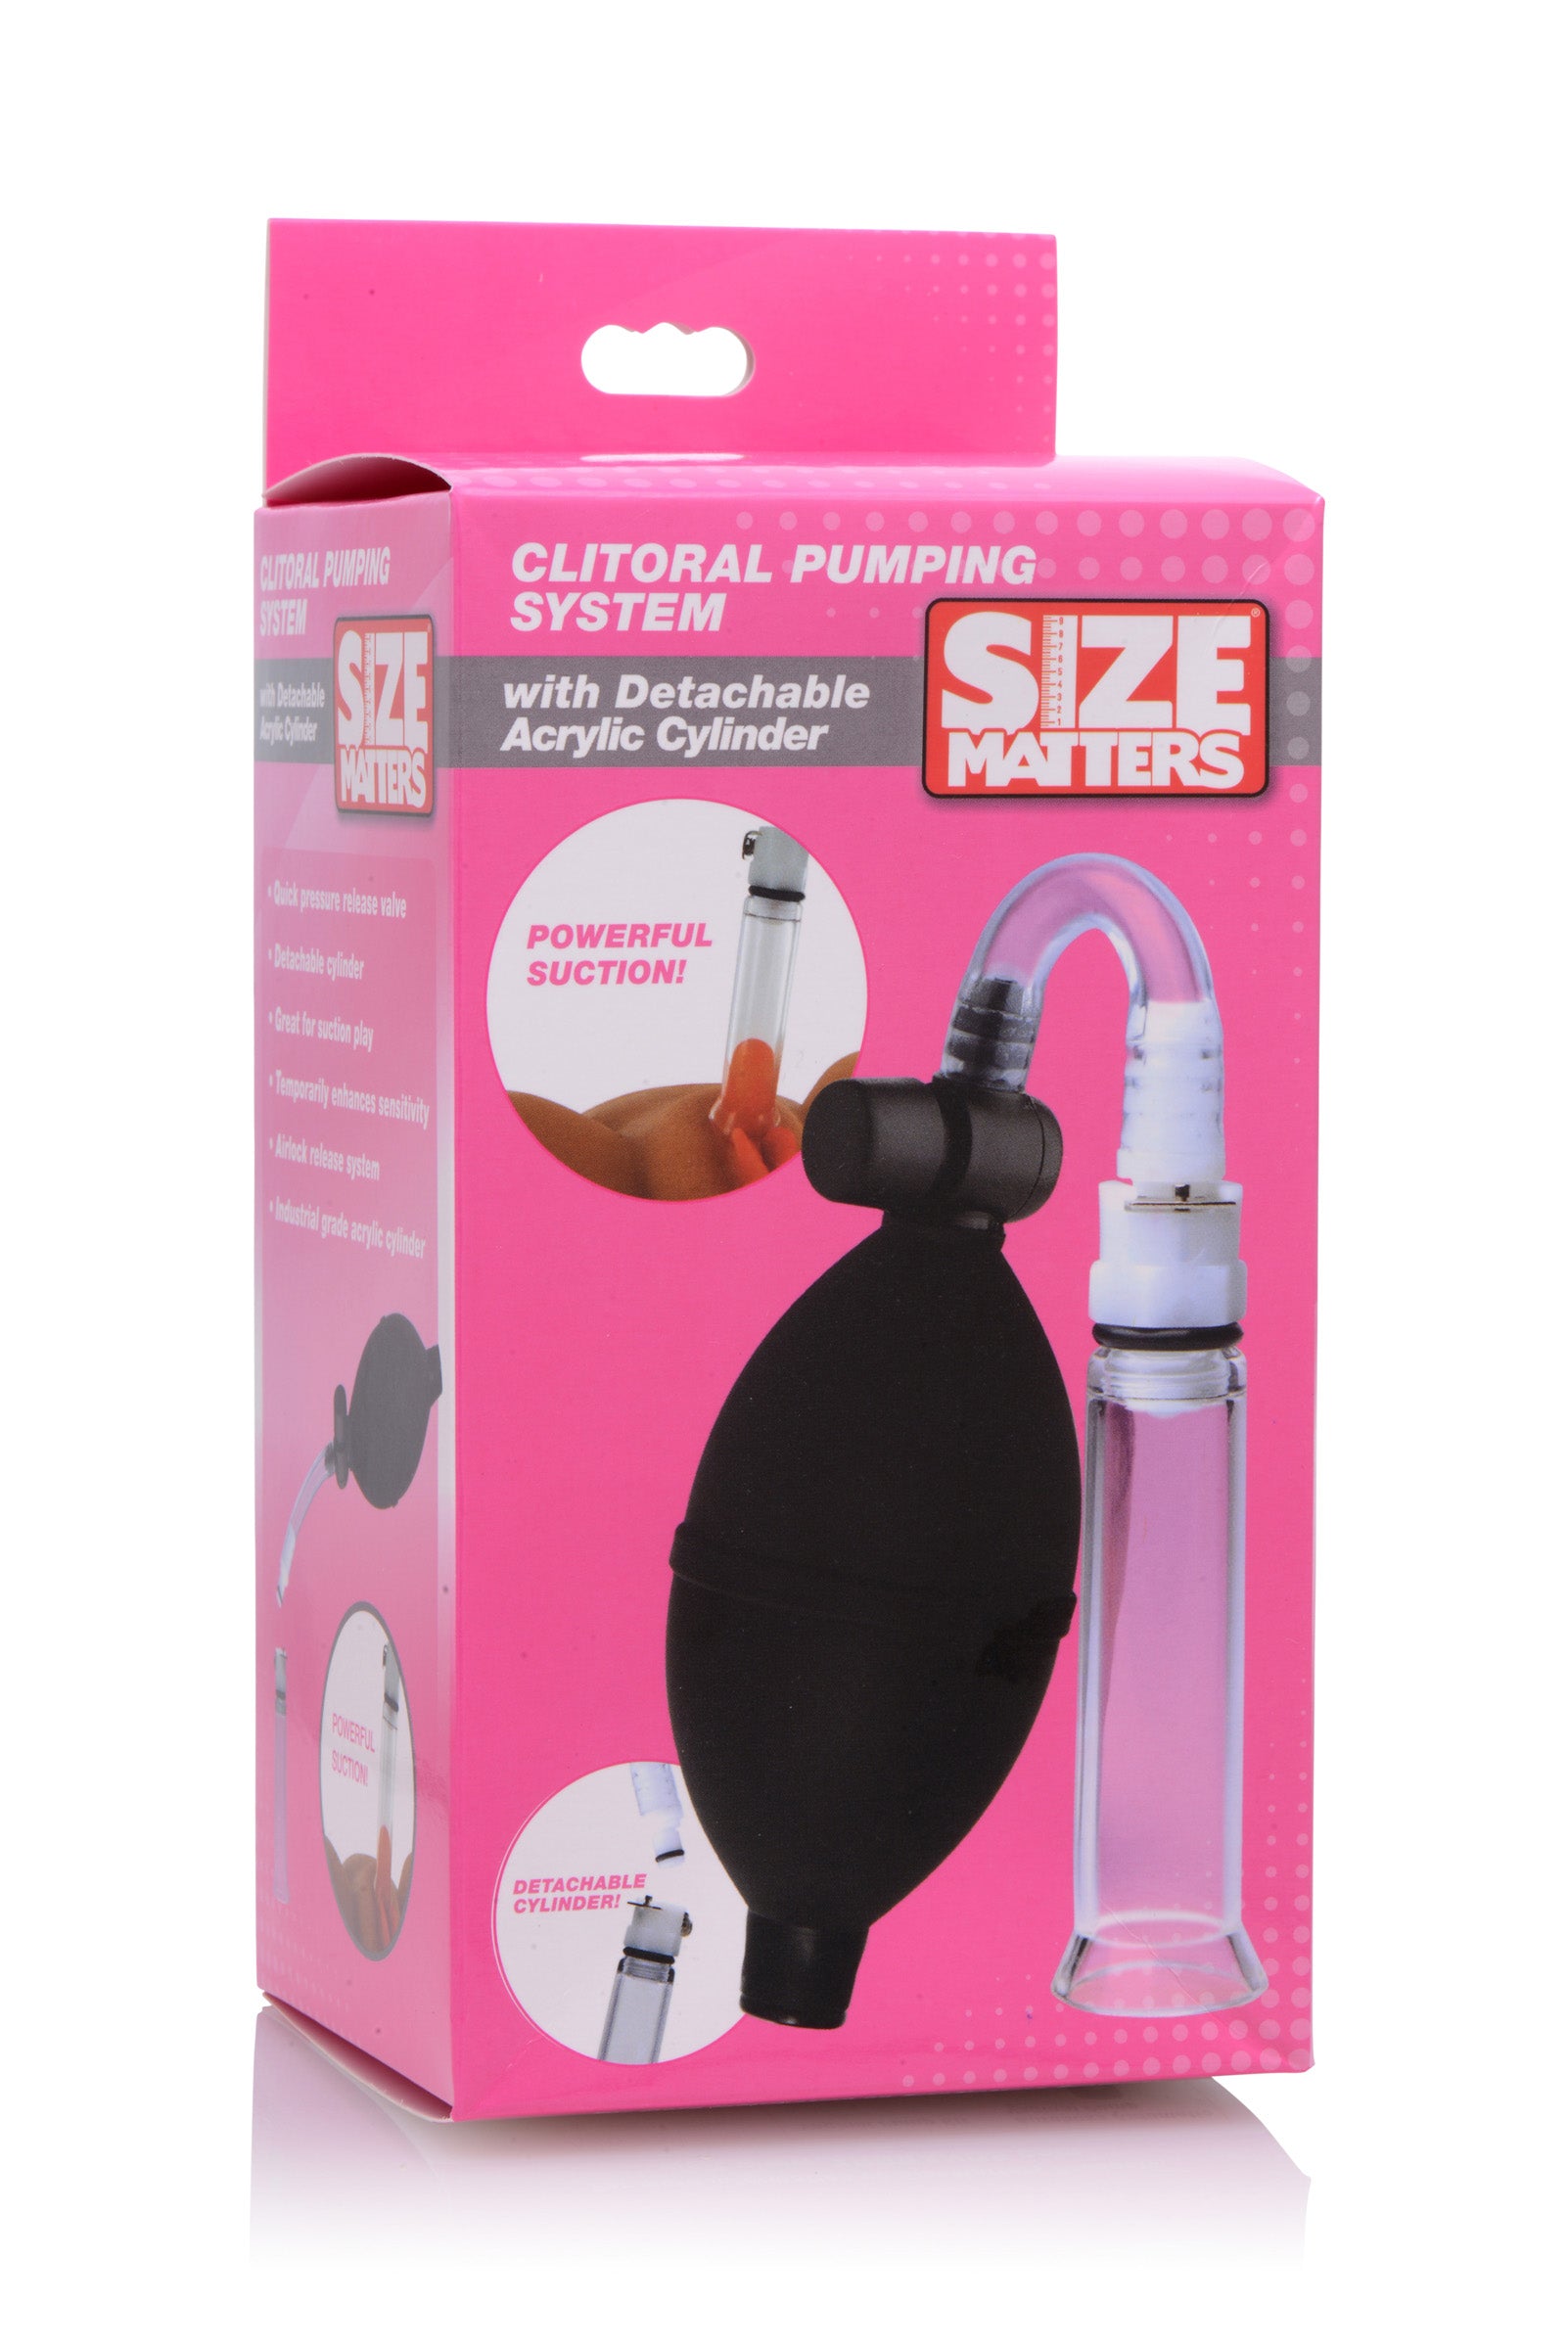 Clitoral Pumping System